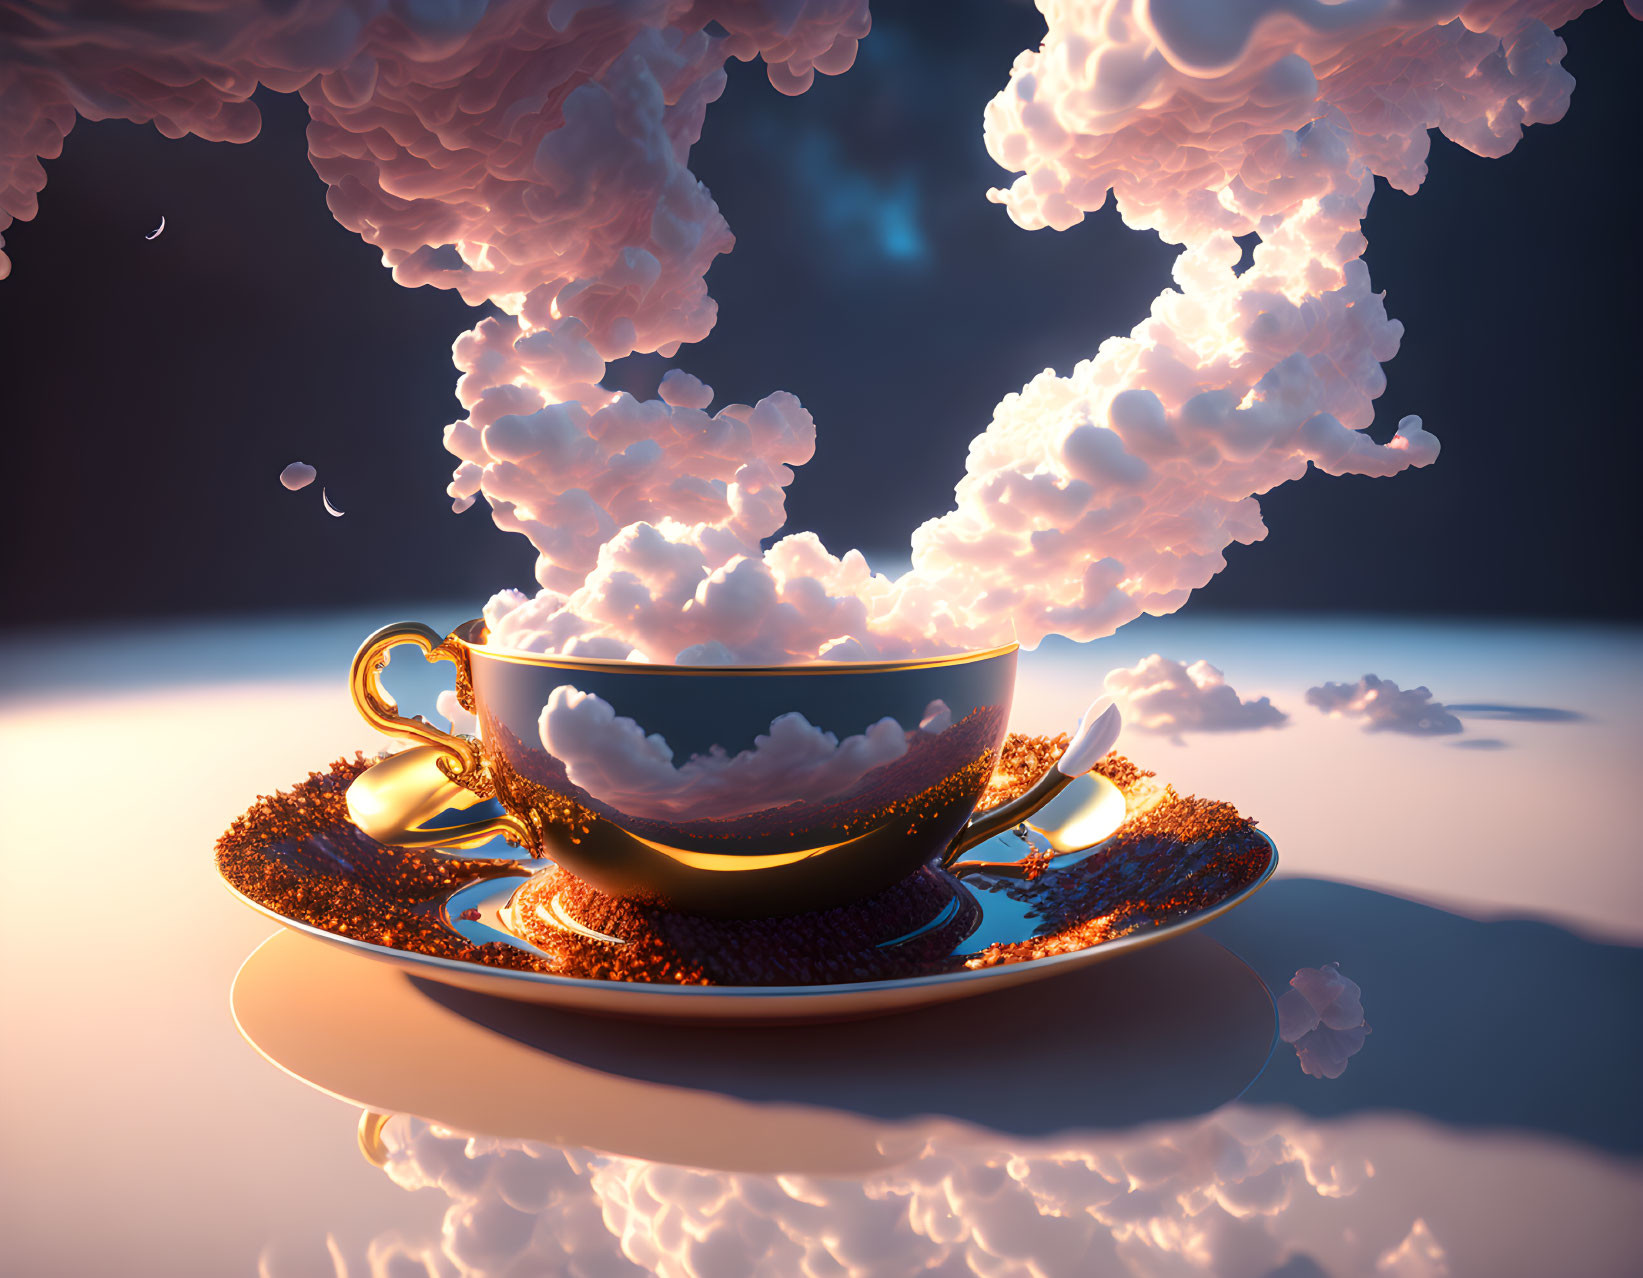 Surreal clouds falls in the tea cup